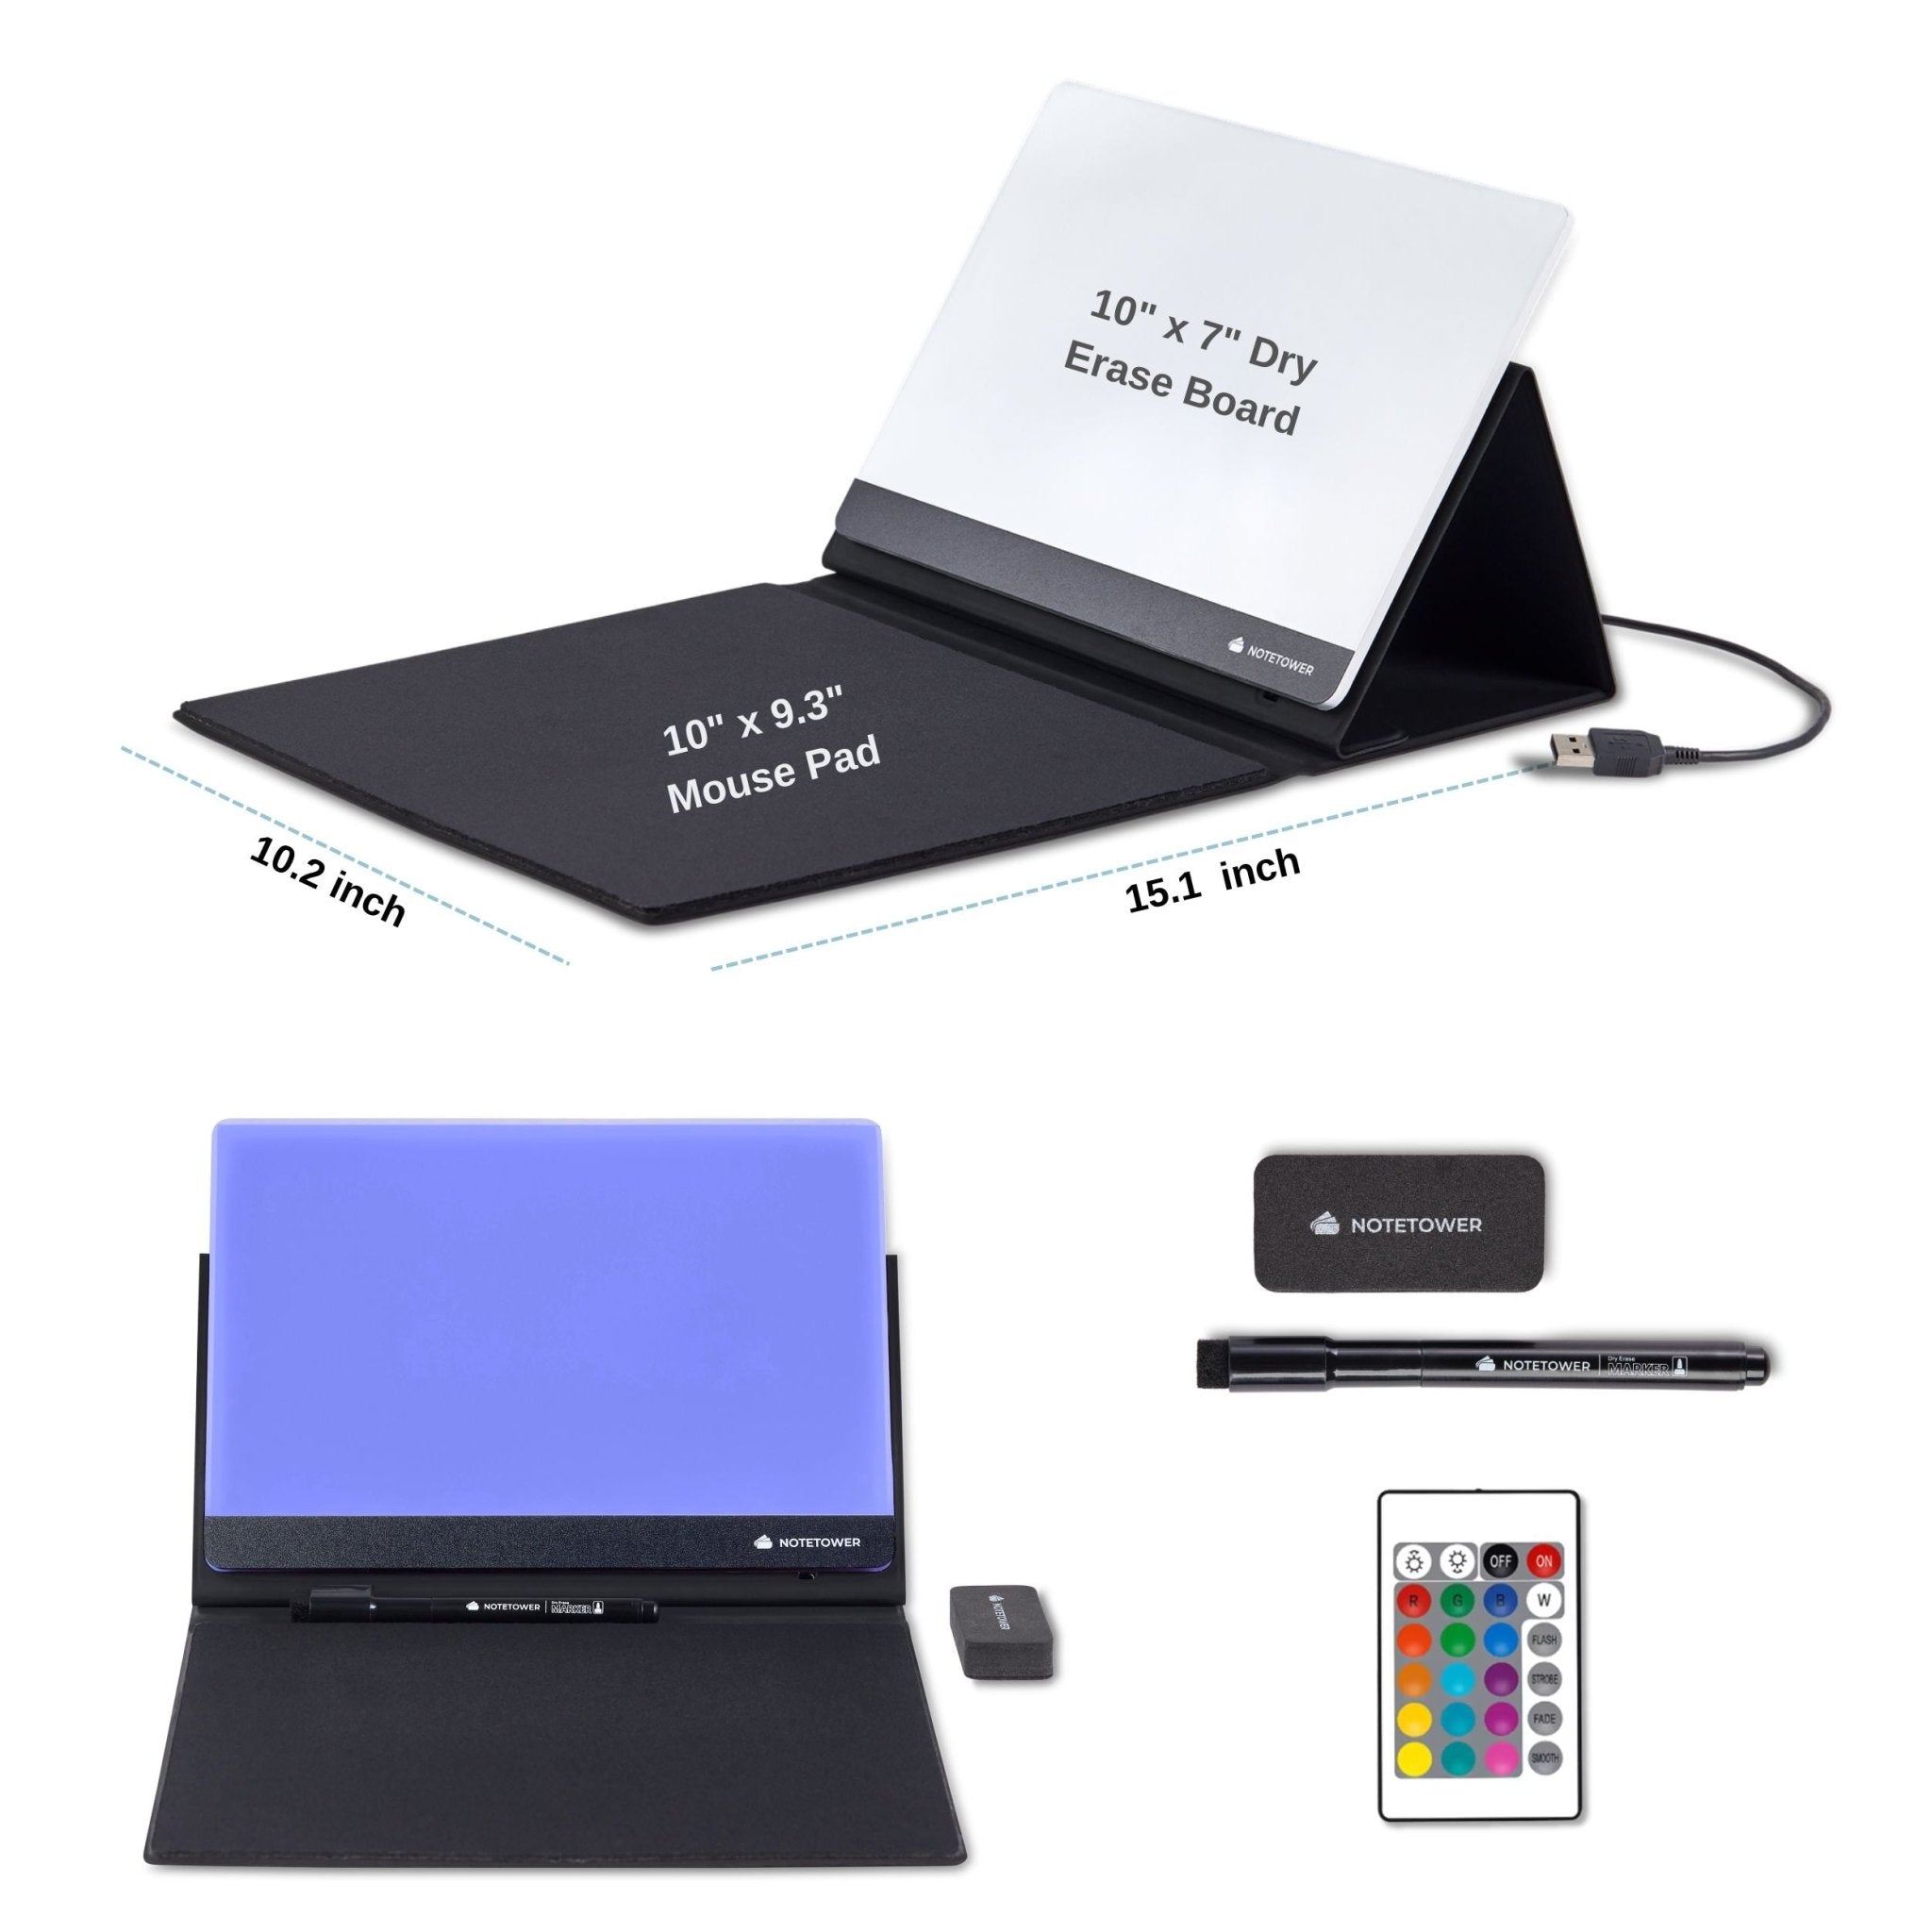 Note Tower Zumiglo Mouse Pad LED Whiteboard - NOTETOWER